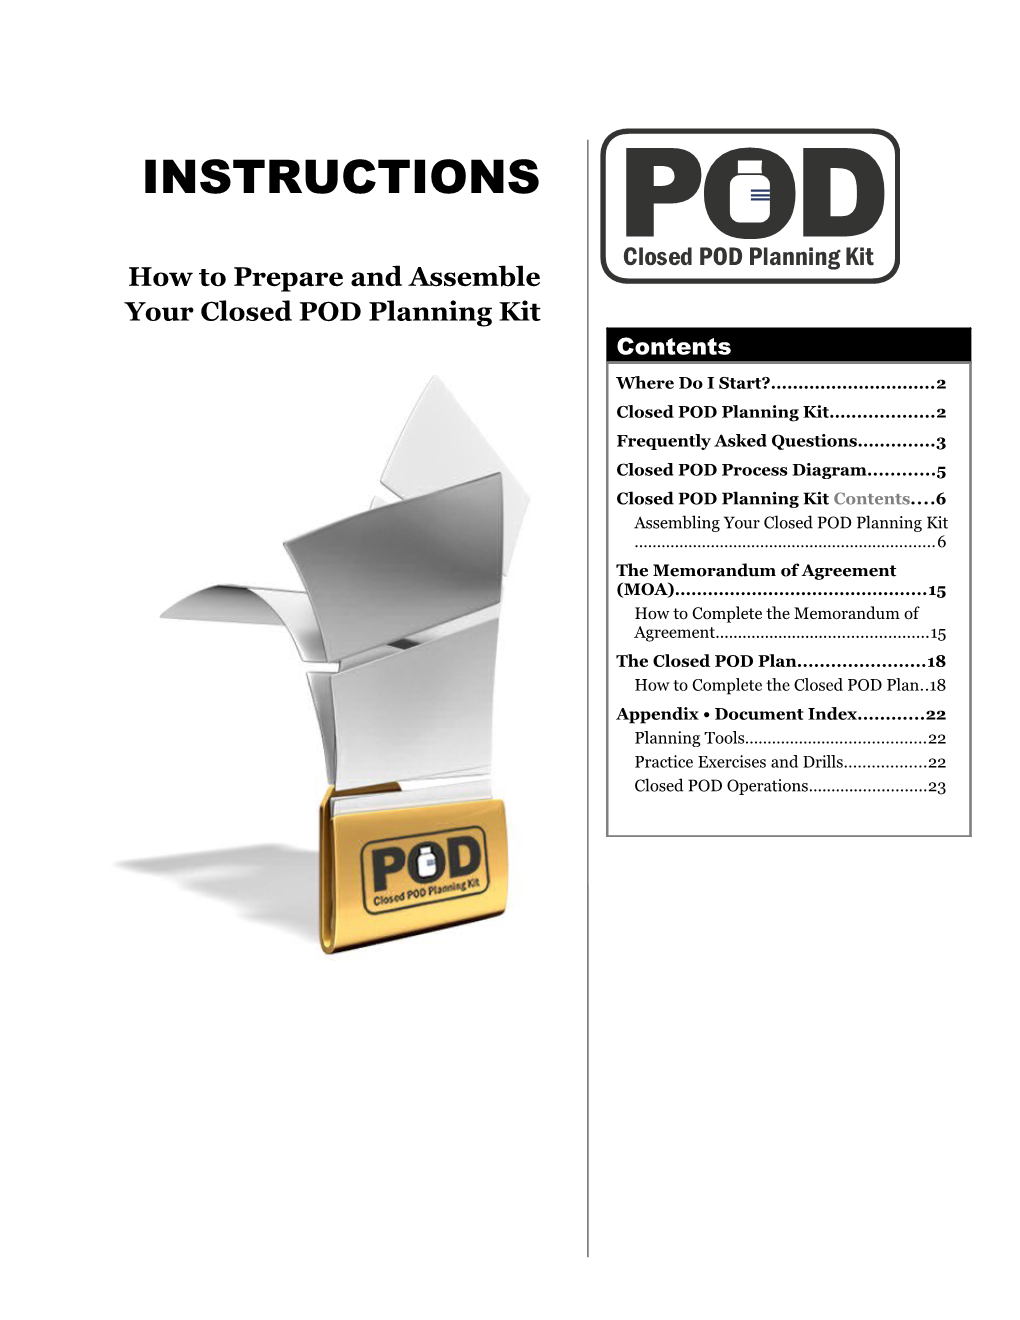 How to Prepare and Assemble Your Closed POD Planning Kit